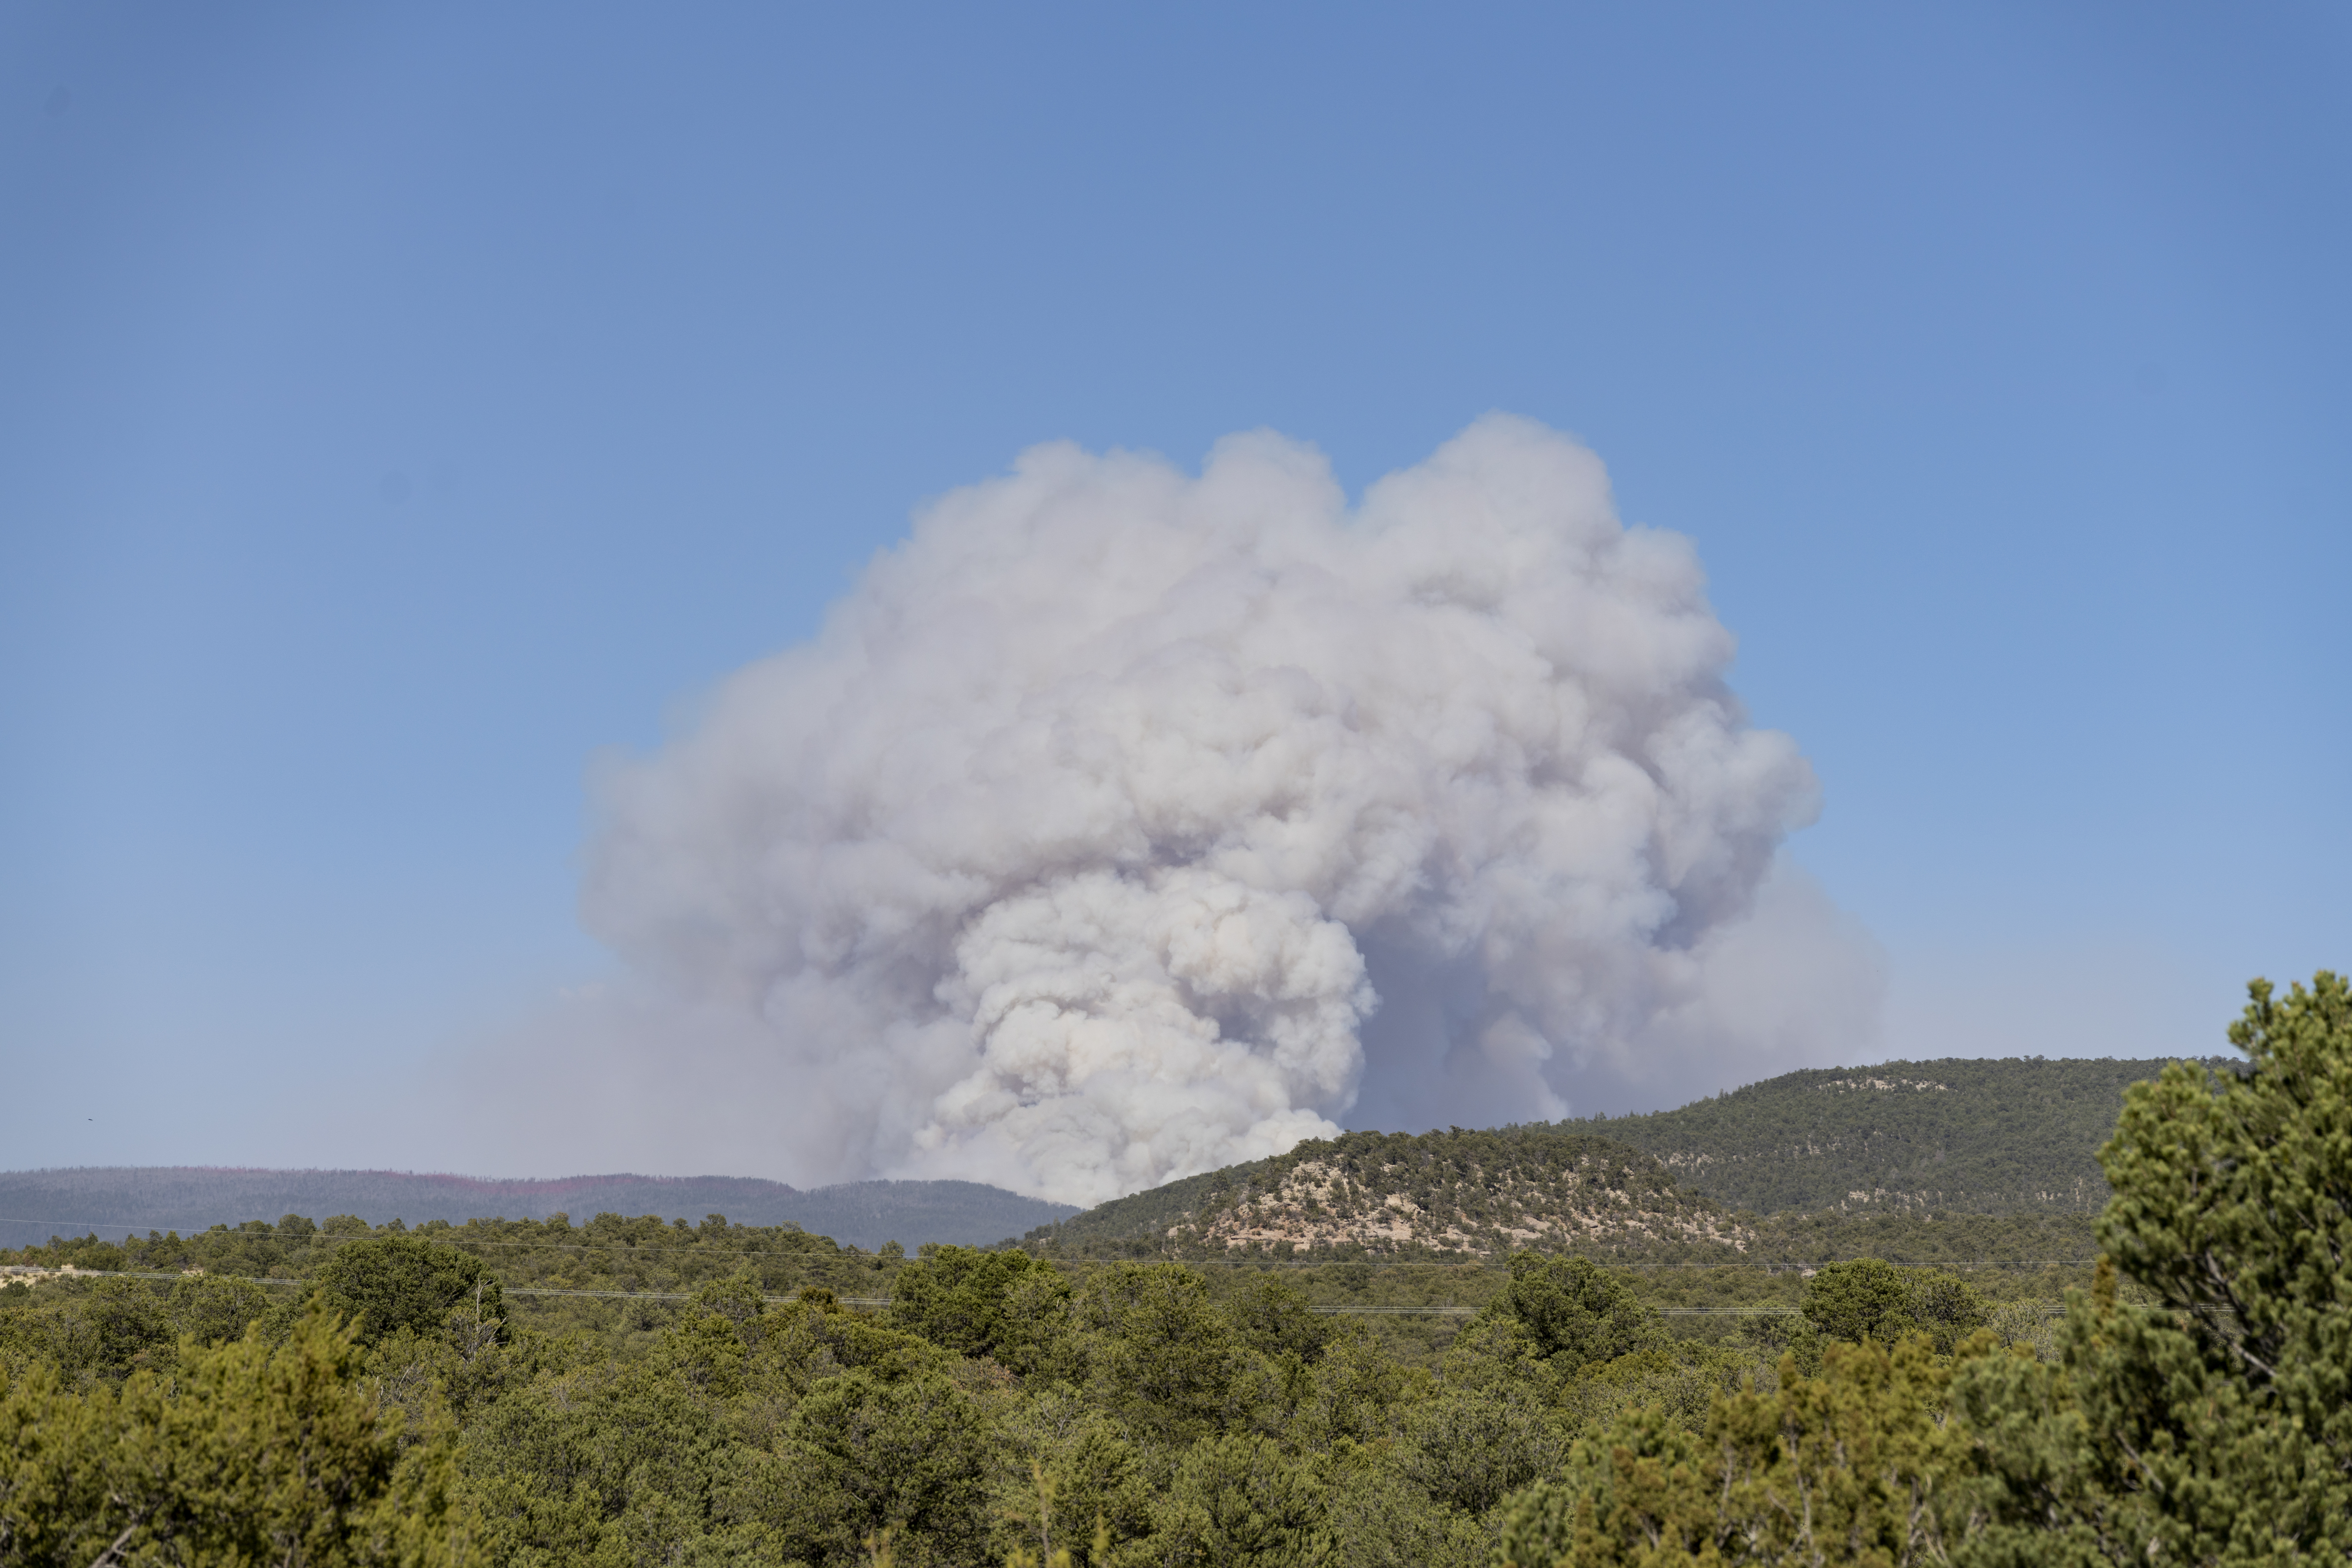 Billowing smoke from Calf Canyon Hermits Peak fire in New Mexico